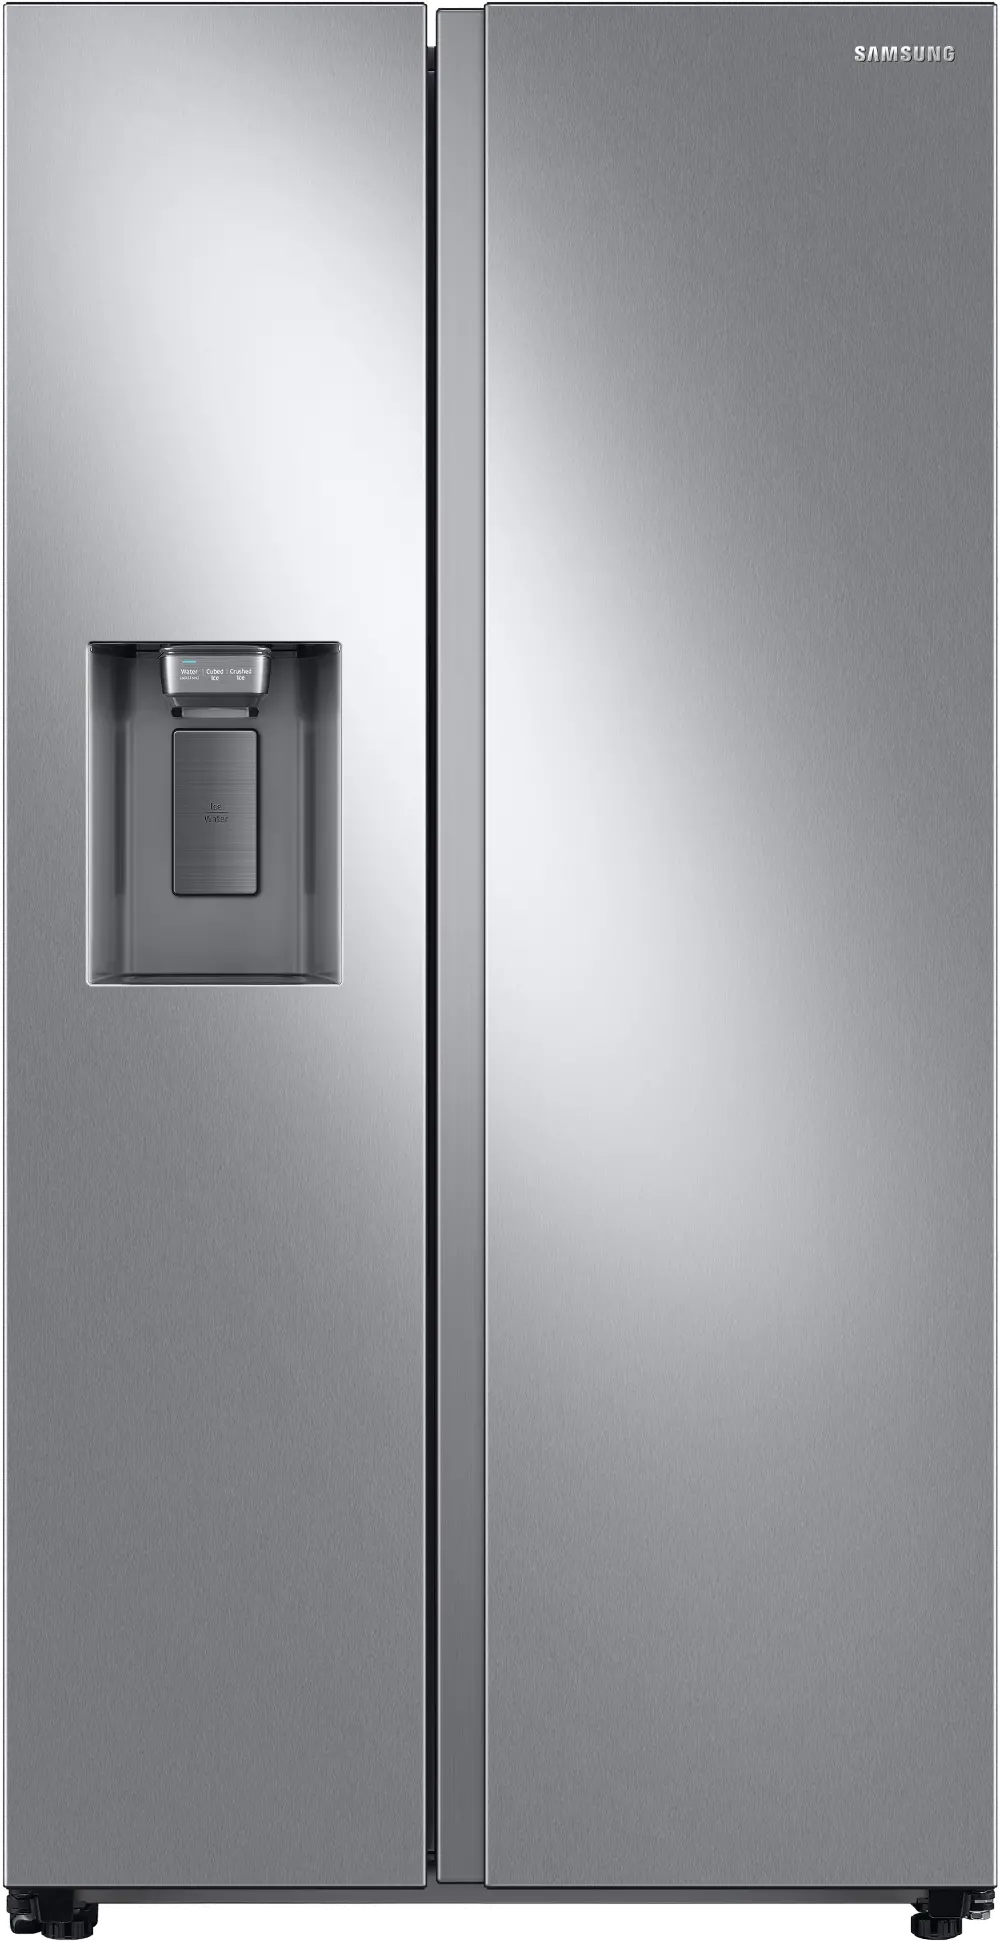 RS27T5200SR Samsung 27.4 cu ft Side by Side Refrigerator - Stainless Steel-1